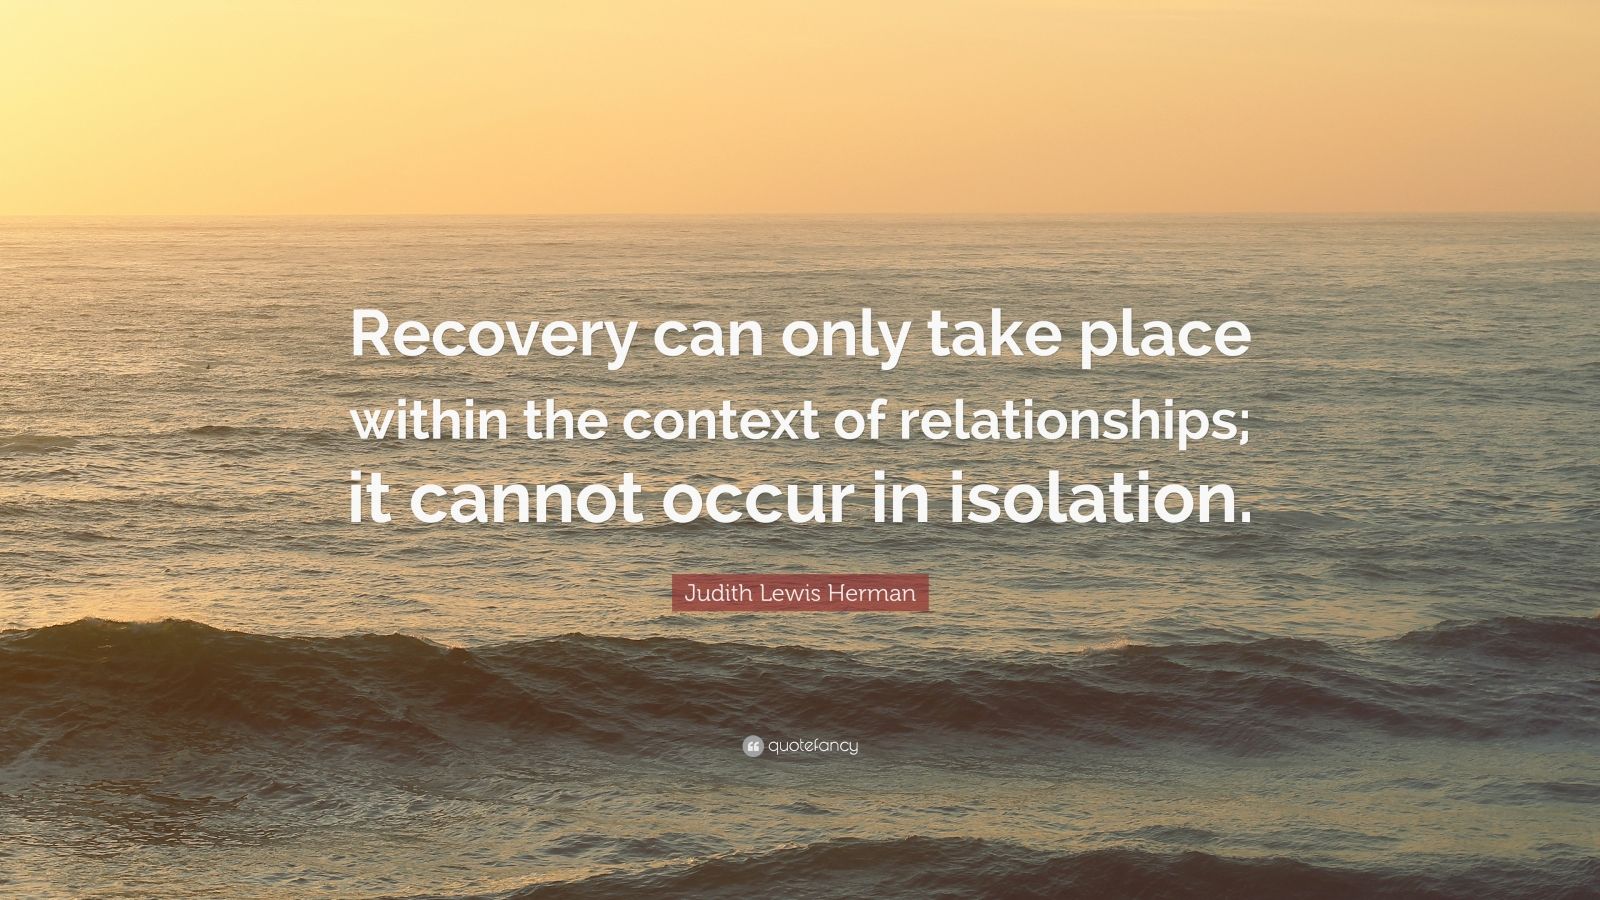 Trauma And Recovery by Judith Lewis Herman